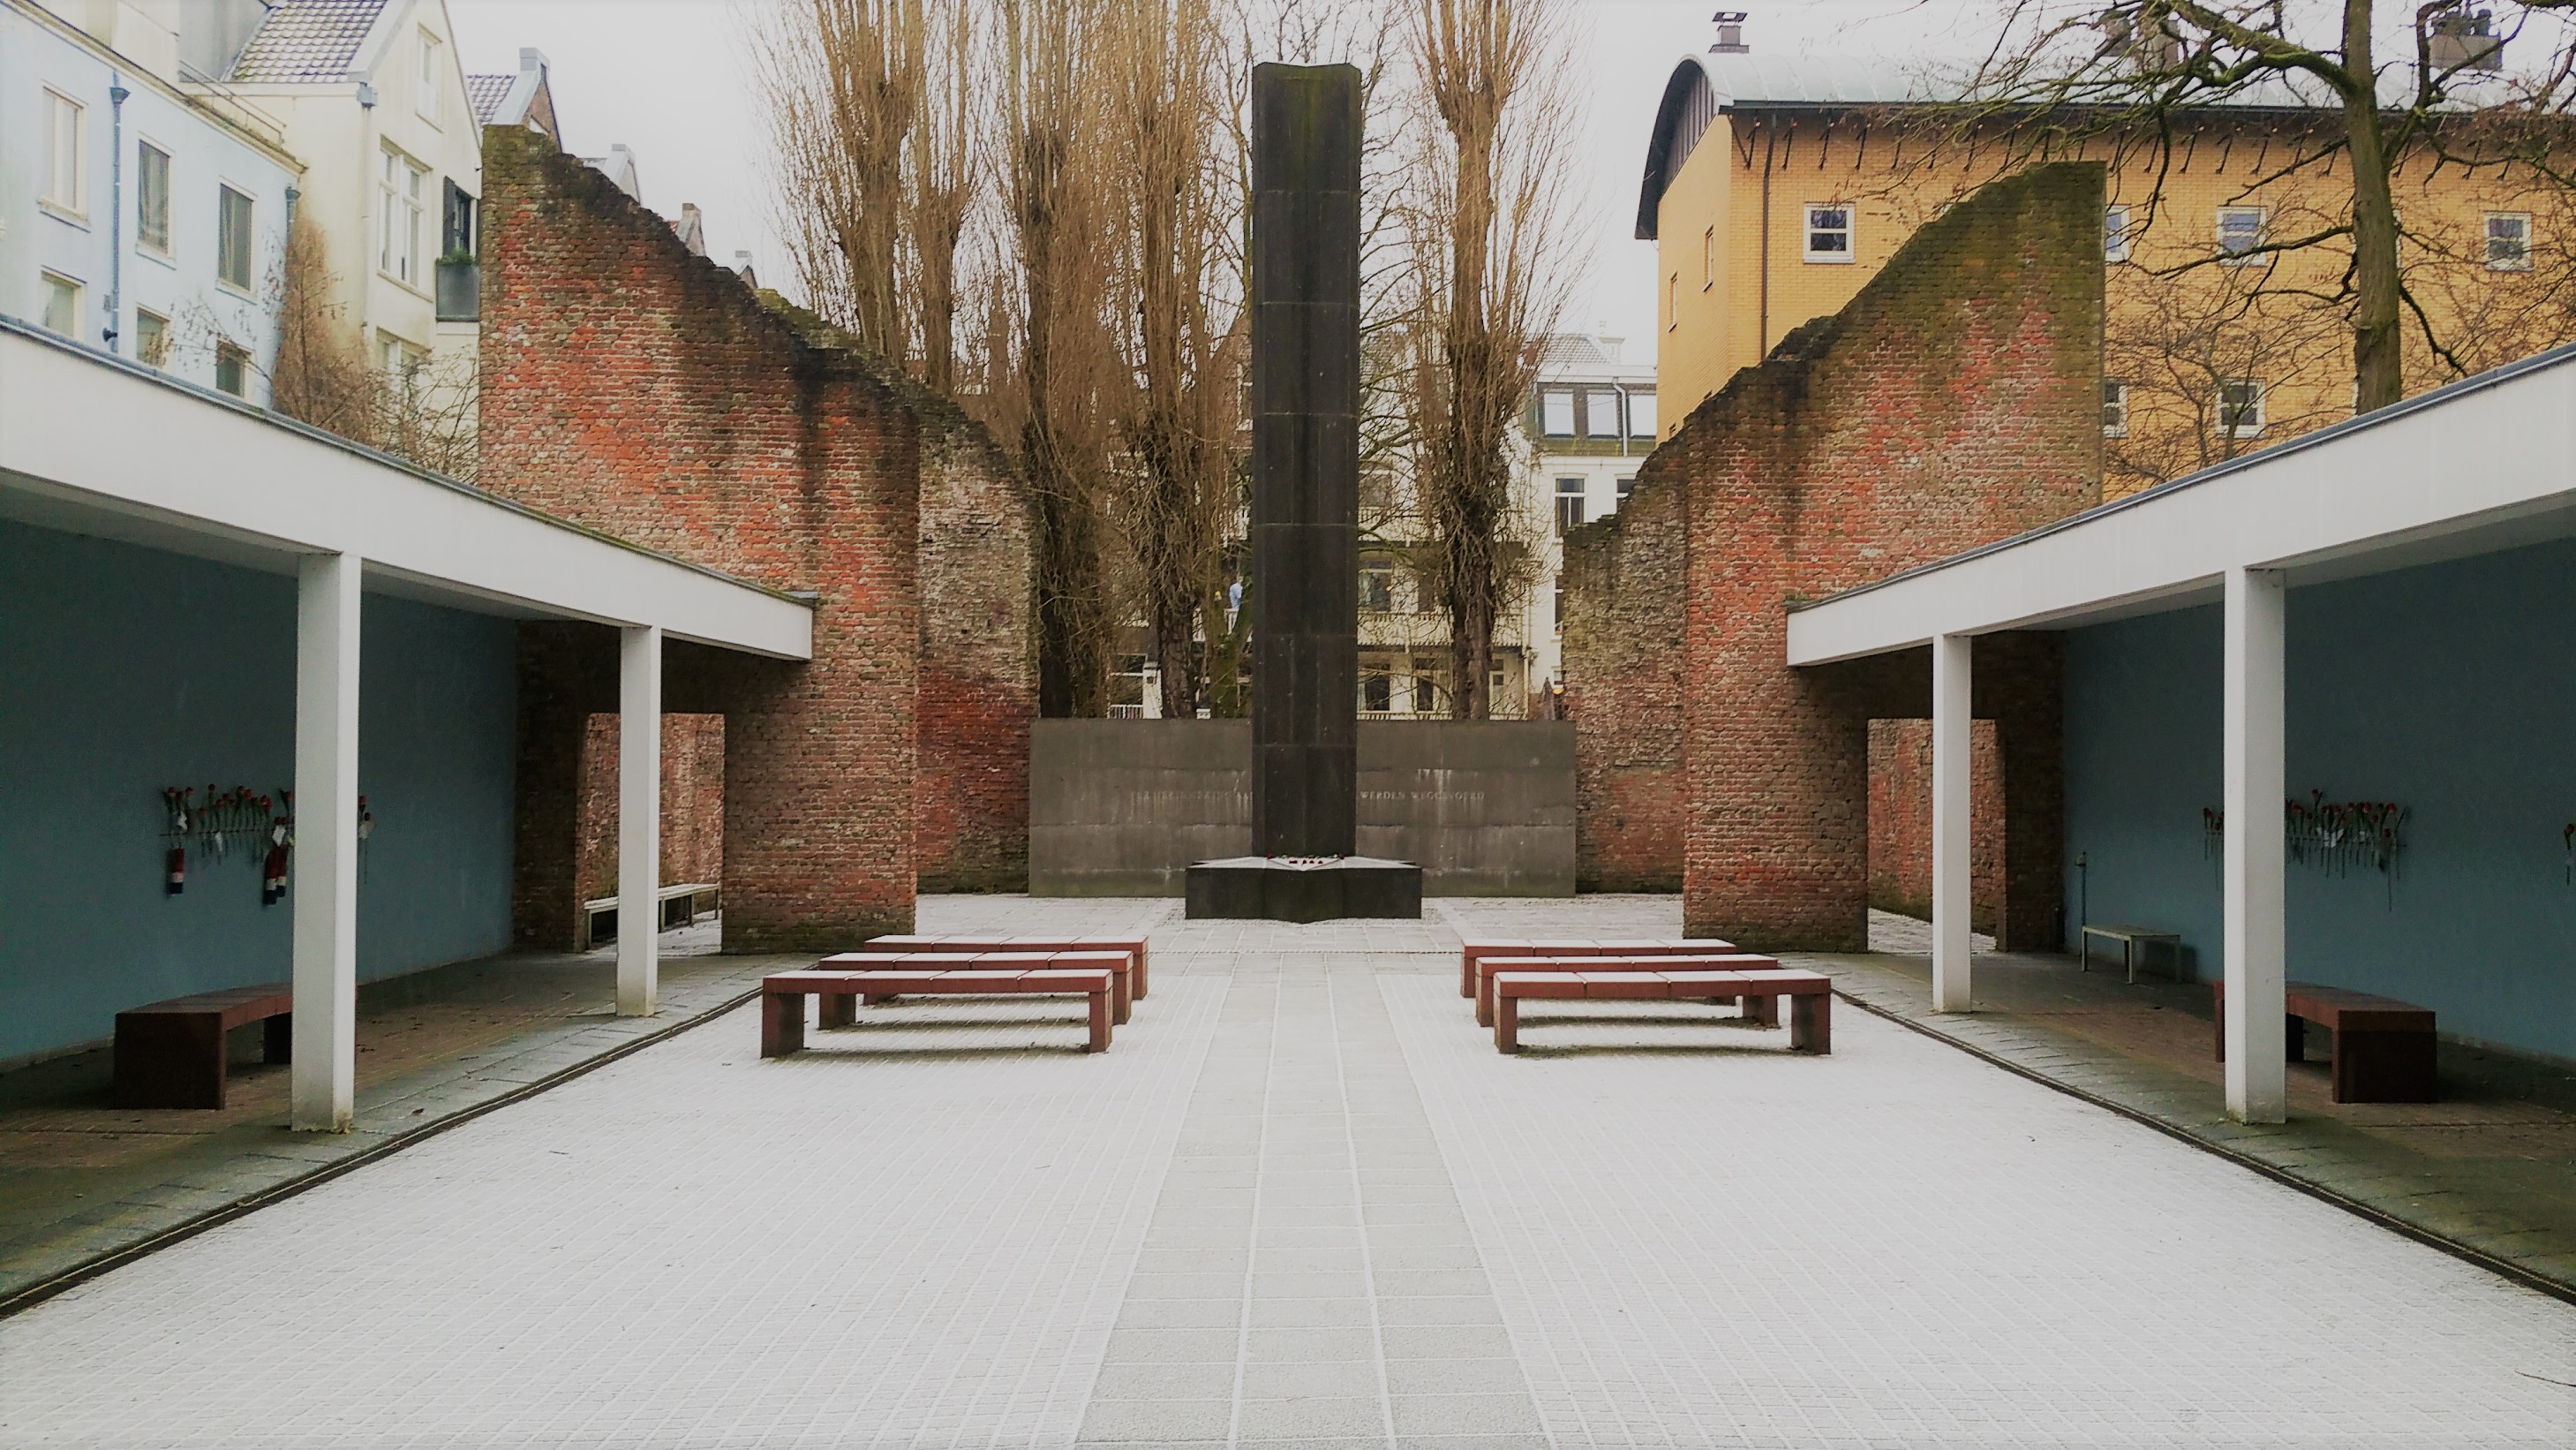 a monument with benches, in between old brick walls and houses